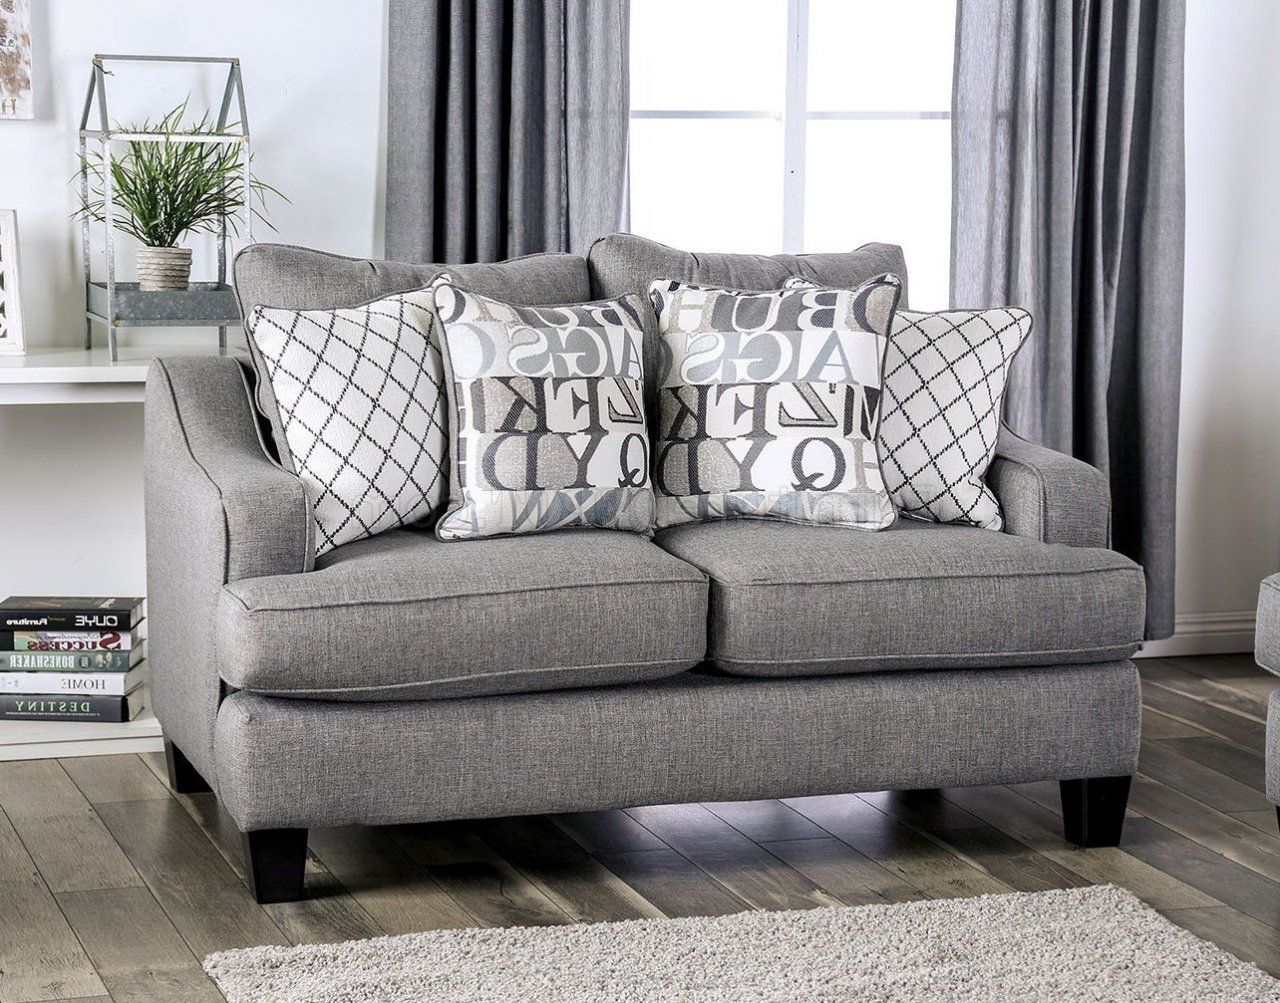 Verne Sofa Sm8330 In Bluish Gray Linen Like Fabric W/options Inside Current Sofas In Bluish Grey (View 7 of 15)